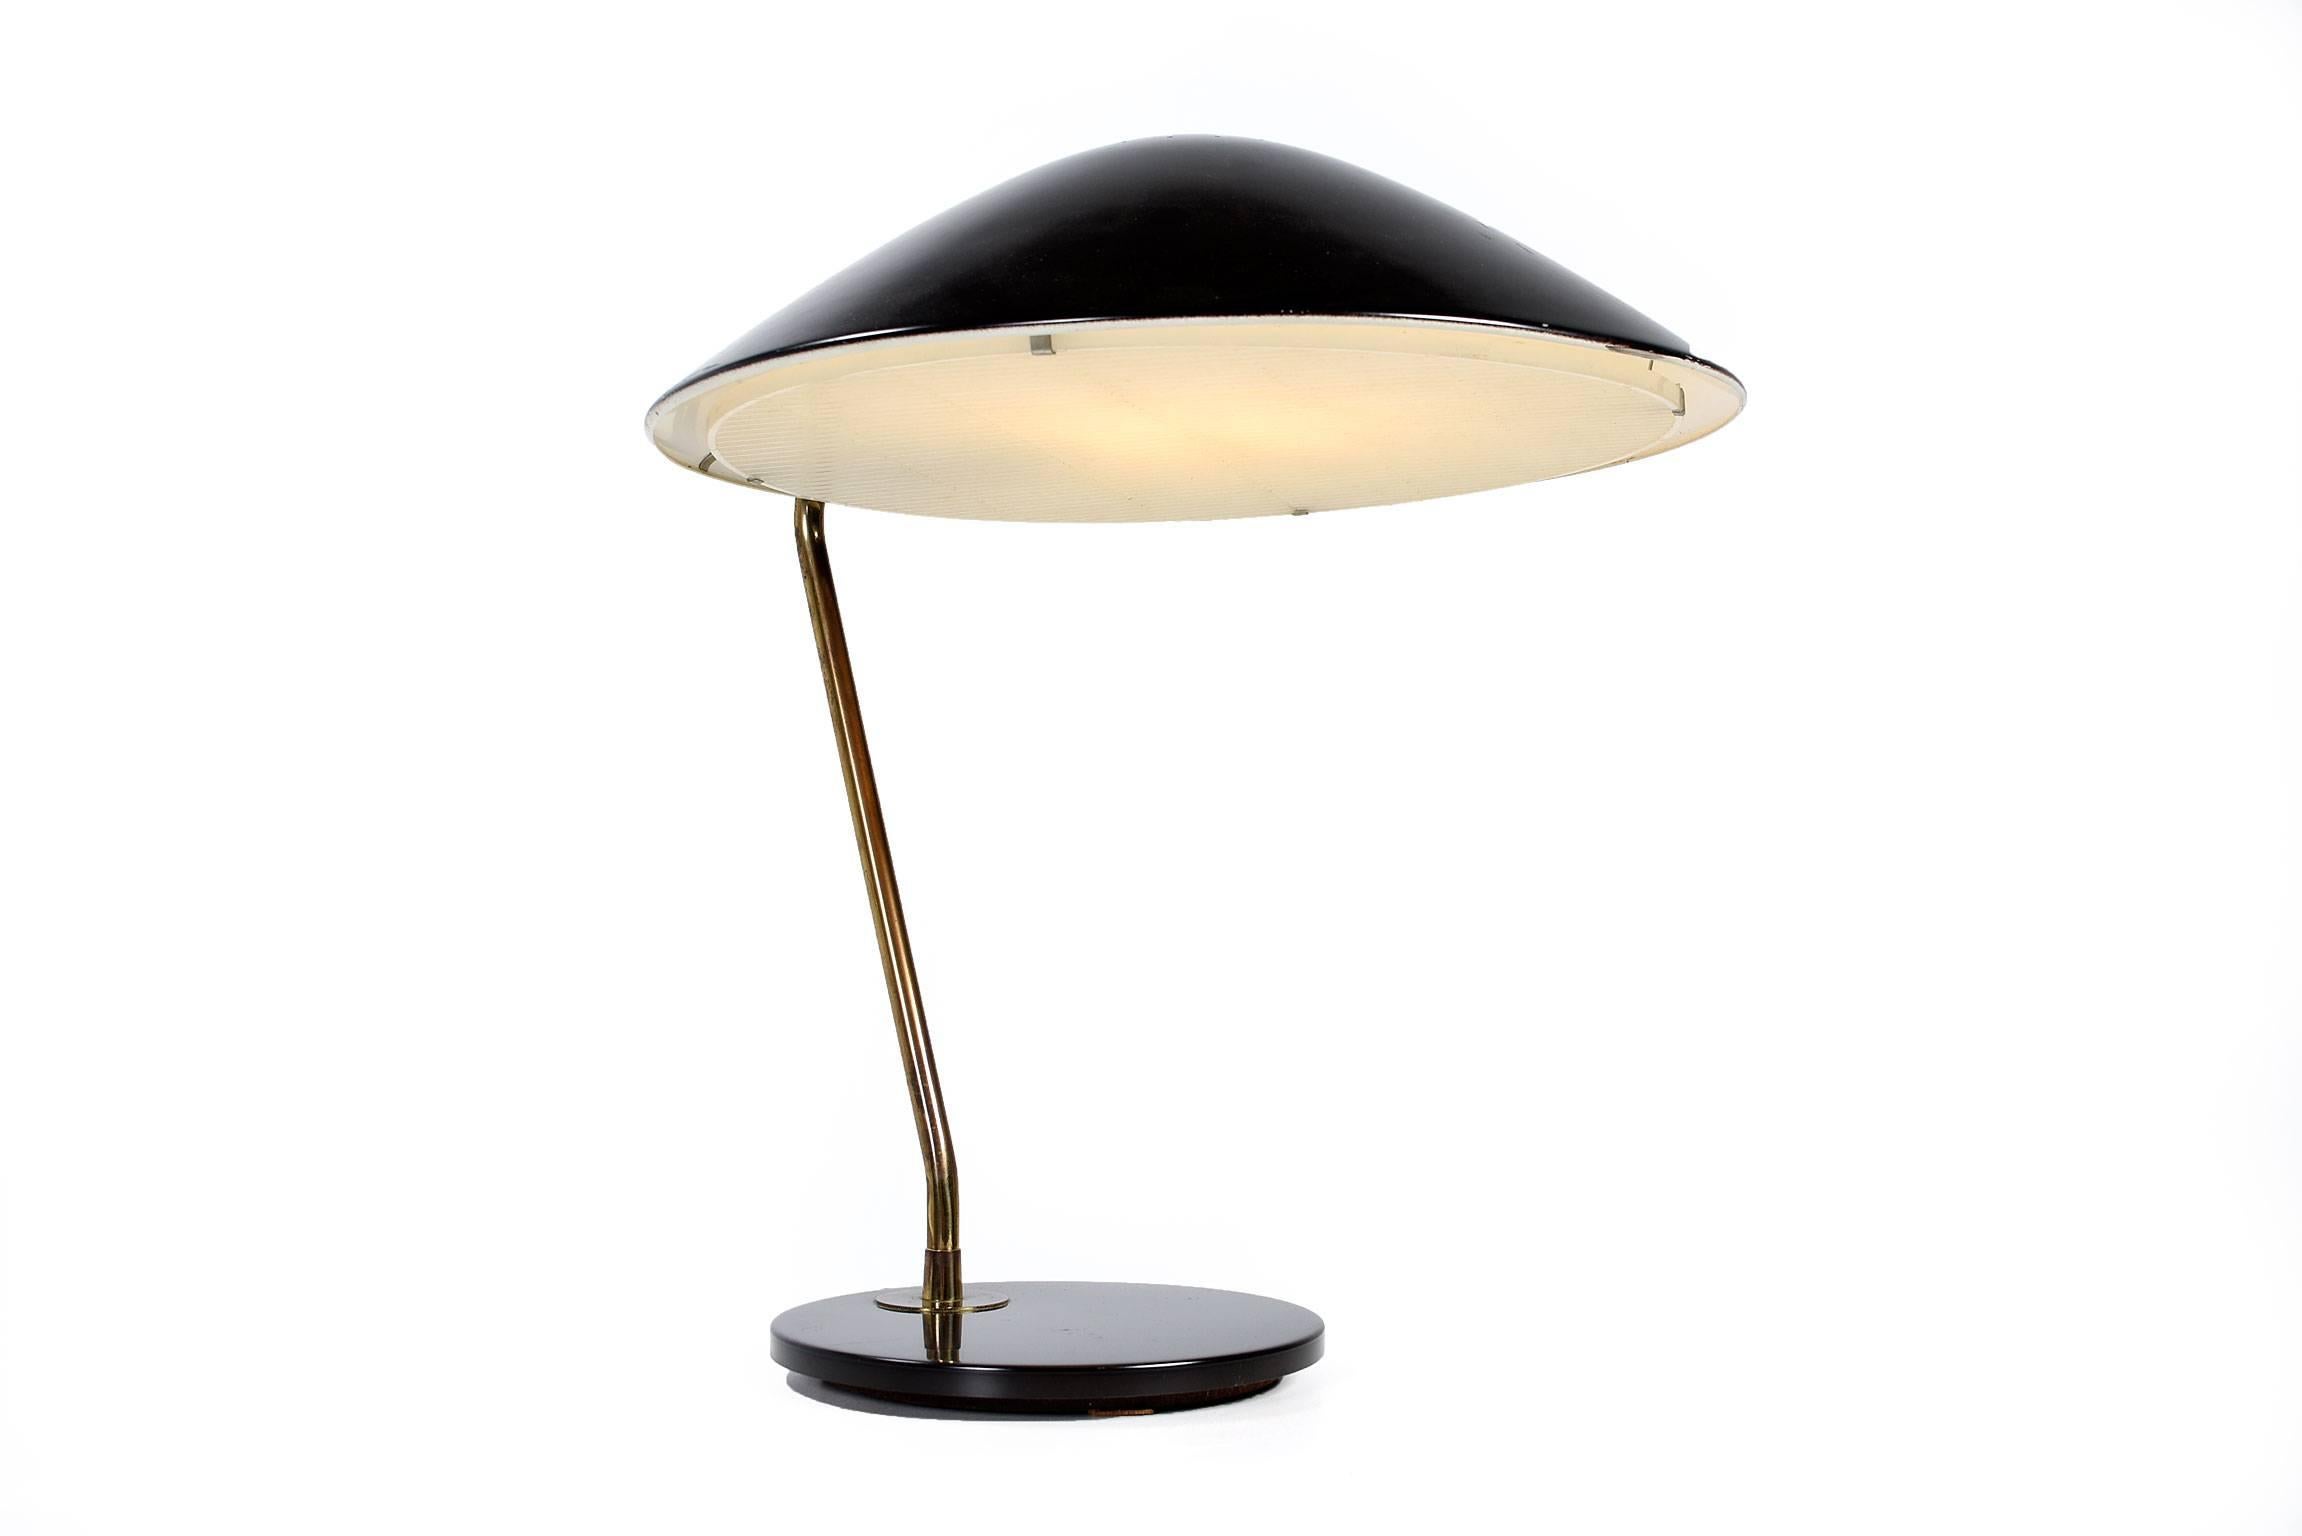 Mid-Century Modern black enamel and brass table or desk lamp designed by Gerald Thurston for Lightolier in the 1950s. It's made of black enameled metal featuring a brass stem, and the original plastic diffuser. This handsome Classic adds design and